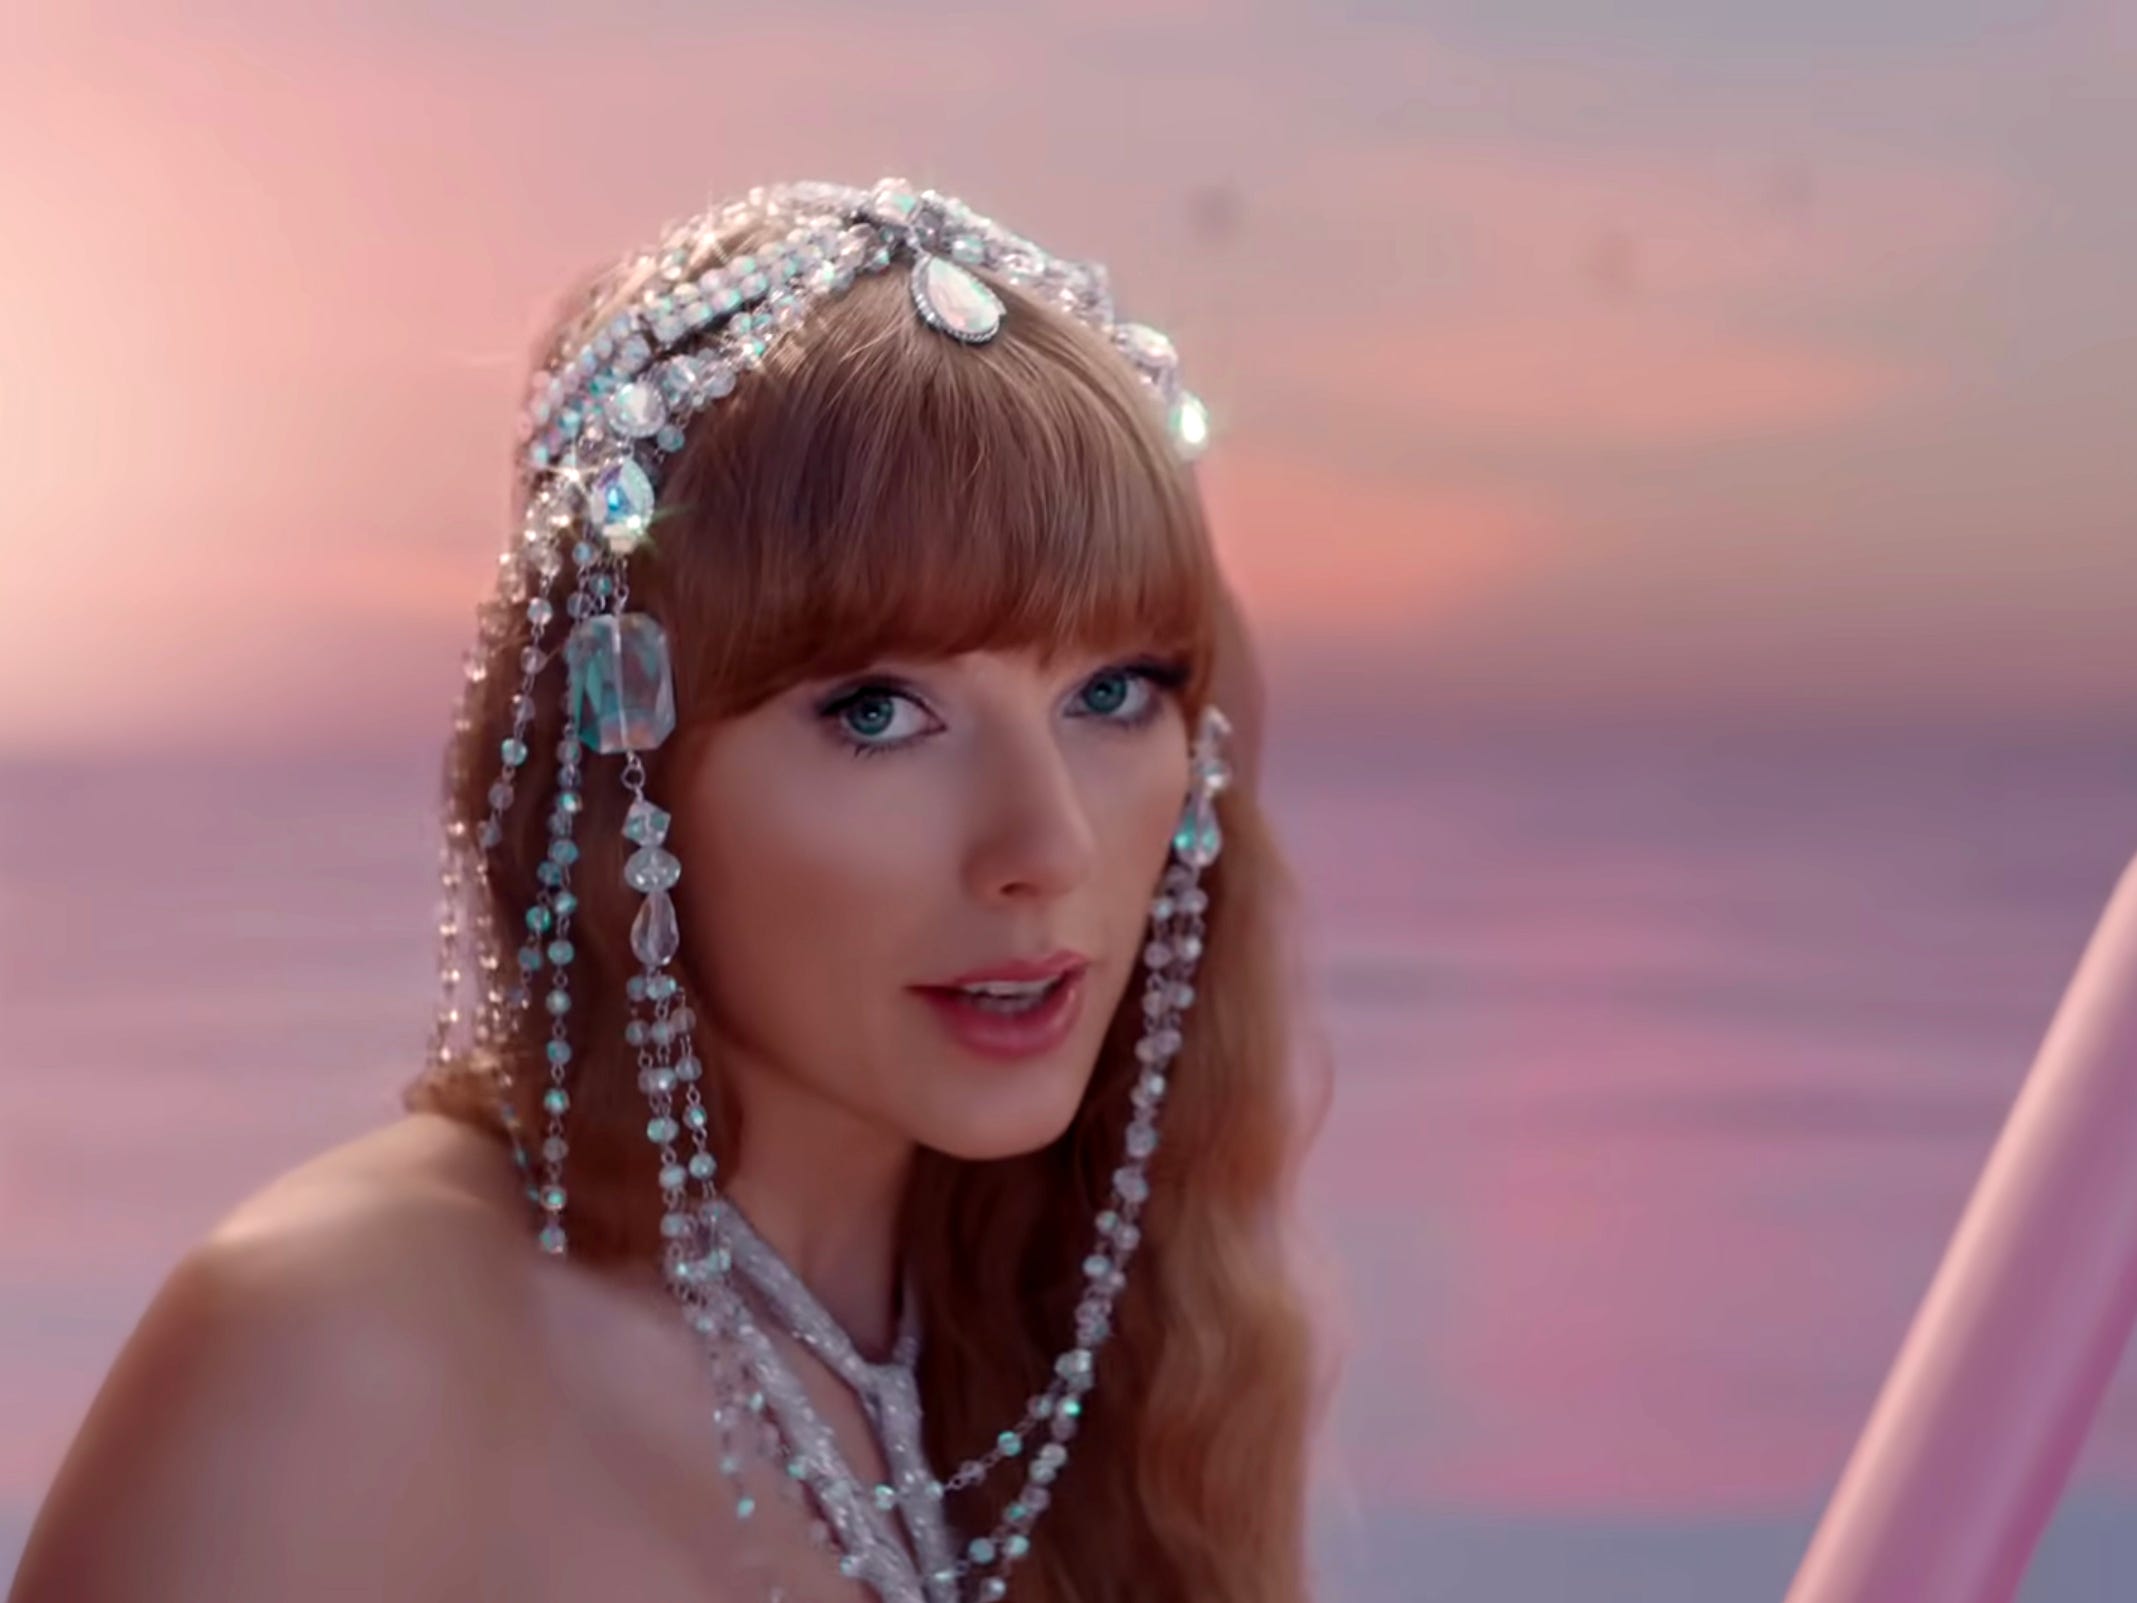 <p>Swift closes the elaborate show with "Karma," a song that mocks her enemies and salutes her own longevity: "Ask me what I learned from all those years / Ask me what I earned from all those tears / Ask me why so many fade, but I'm still here."</p>